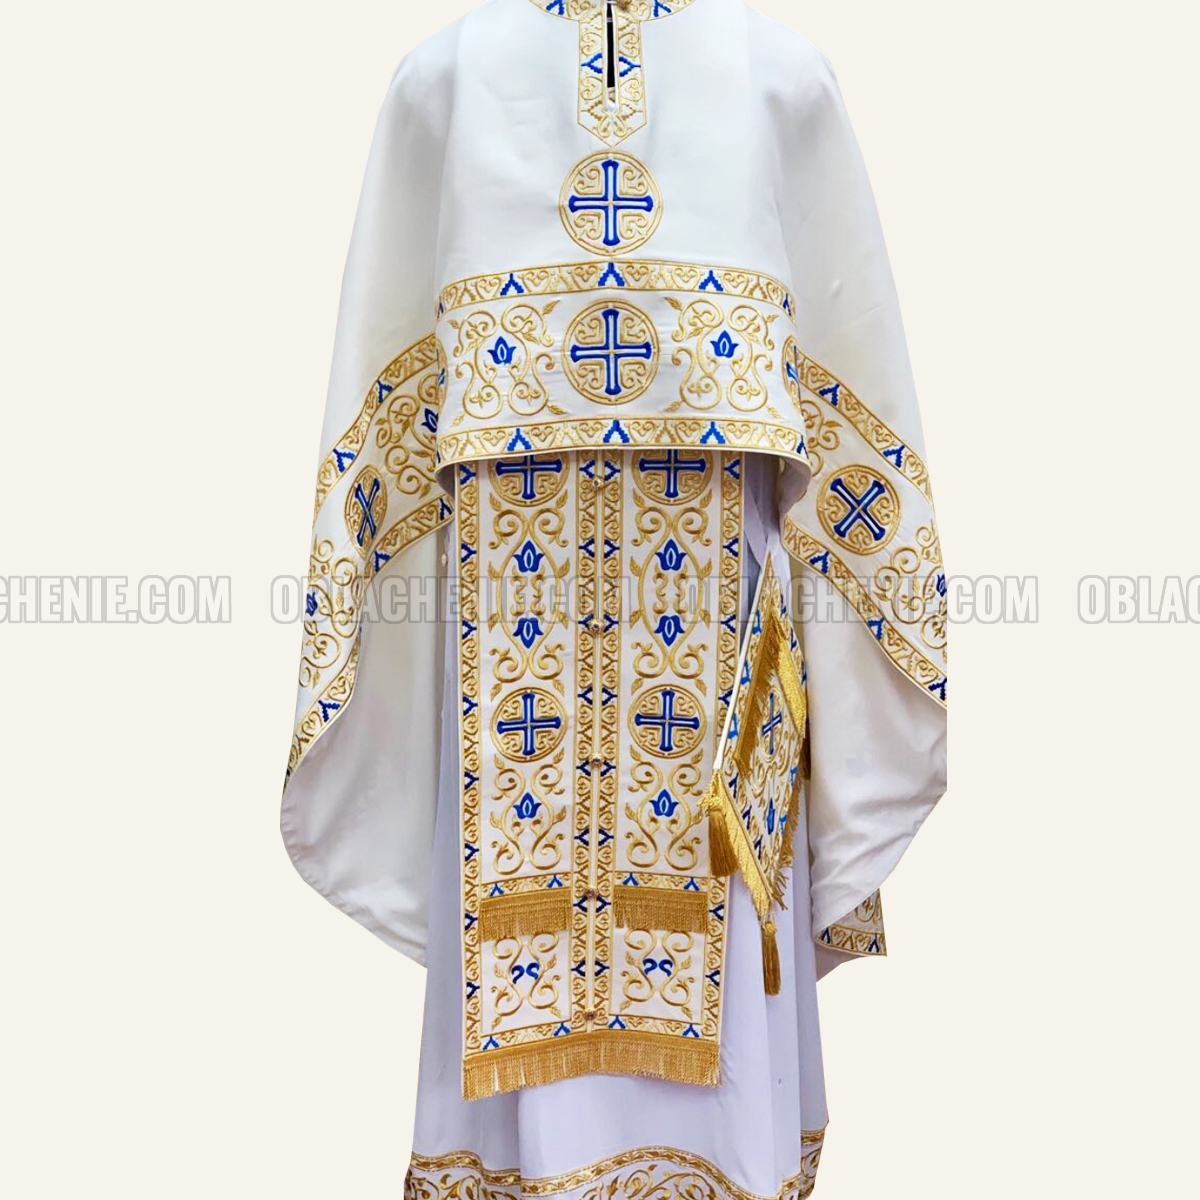 Embroidered priest's vestments 10191